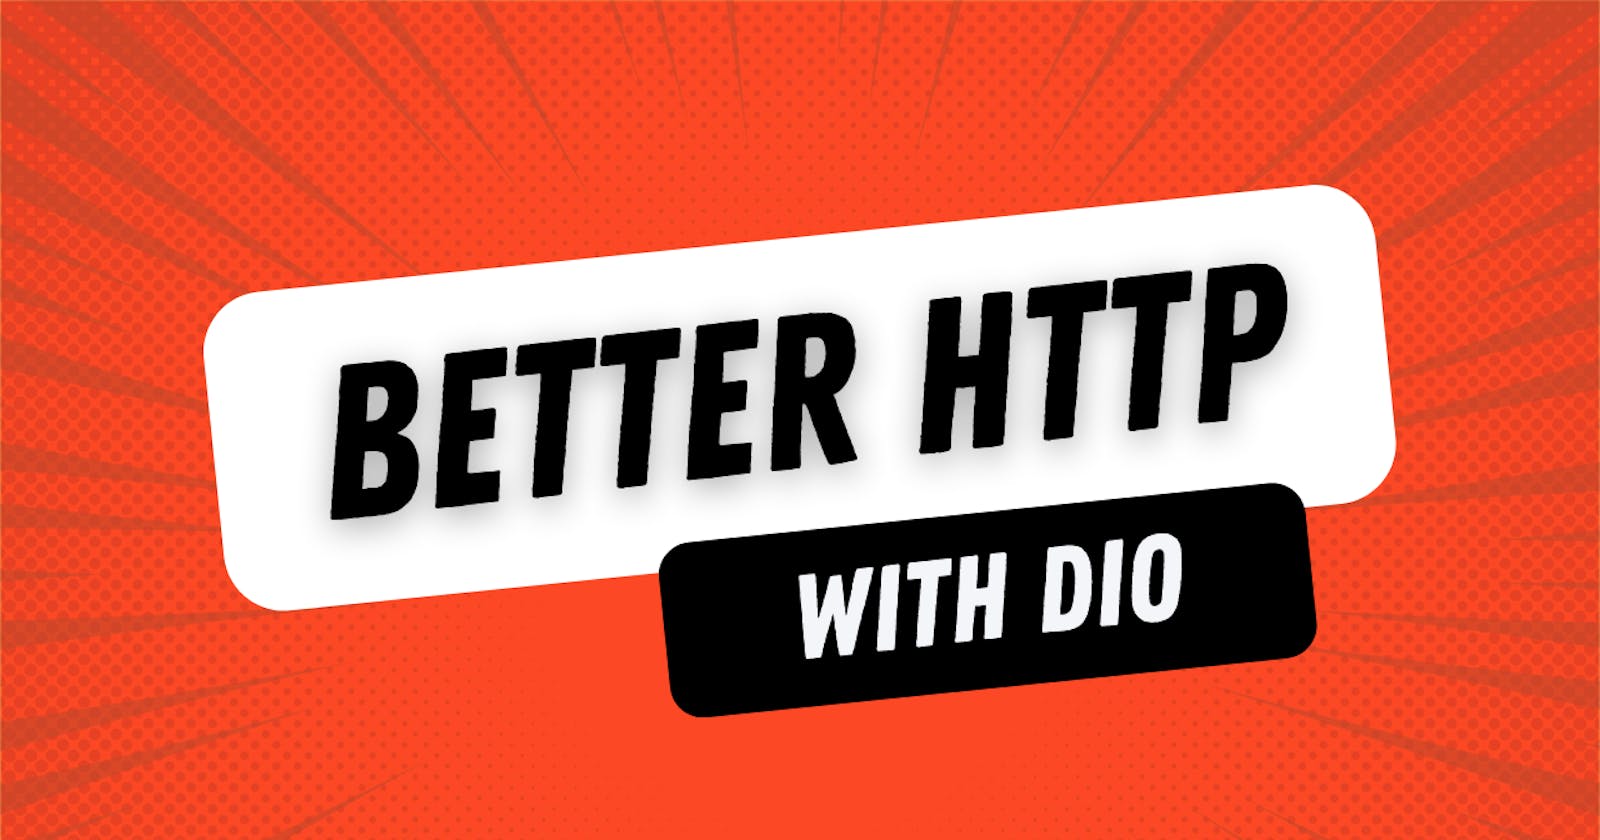 Better HTTP with Dio